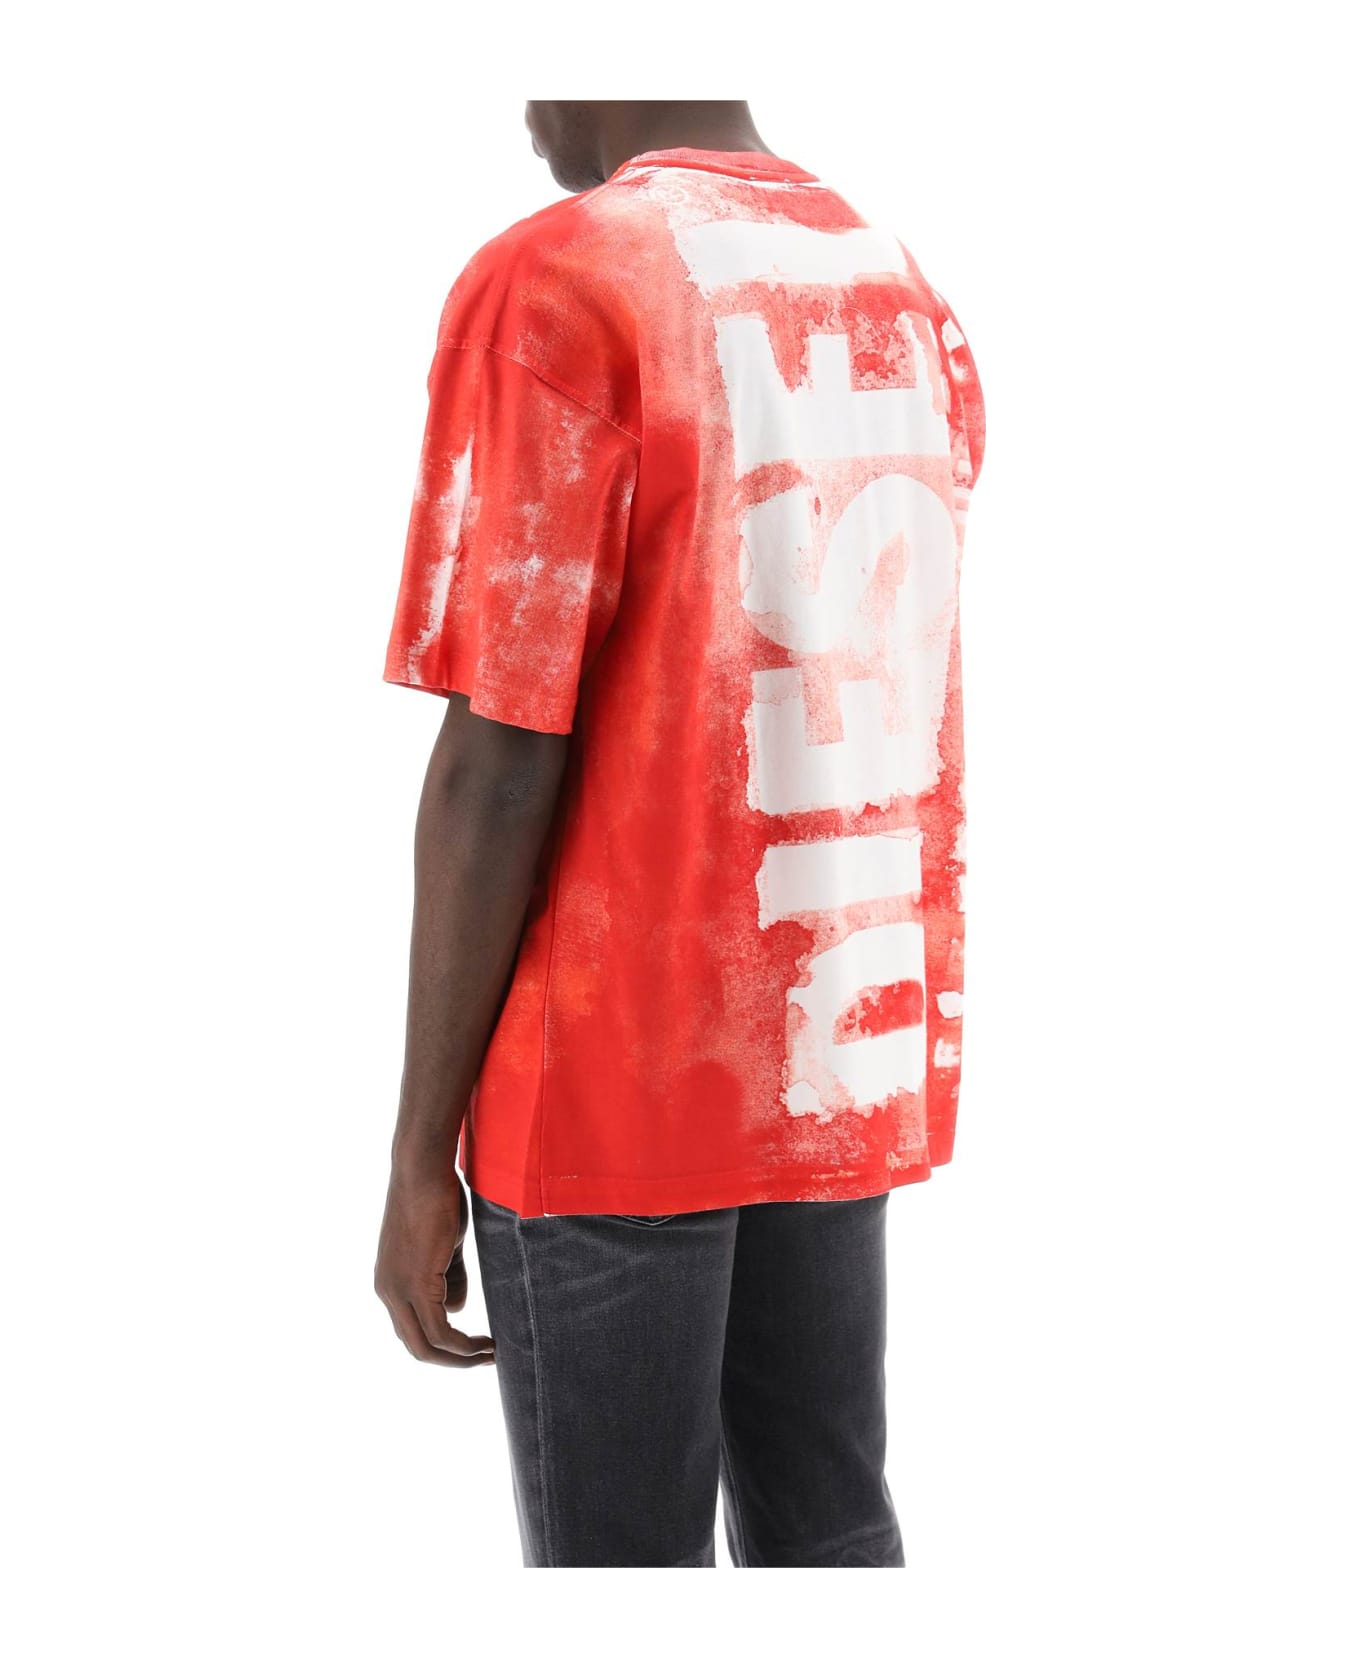 Diesel Printed T-shirt With Oversized Logo - FORMULA RED (Red)